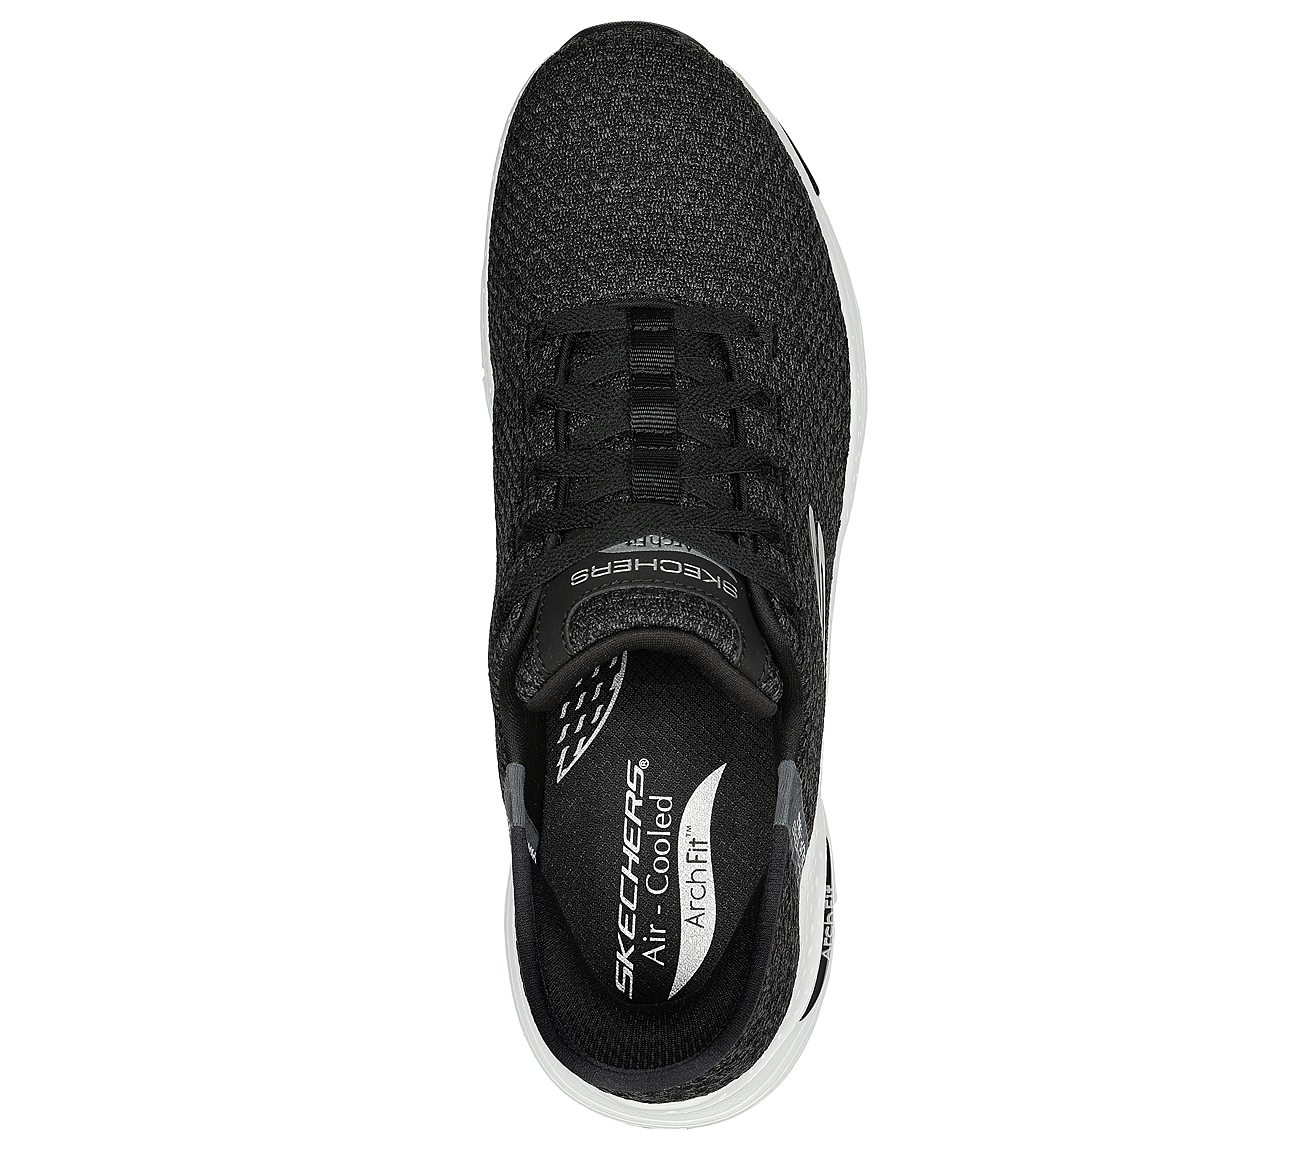 ARCH FIT, BLACK/WHITE Footwear Top View